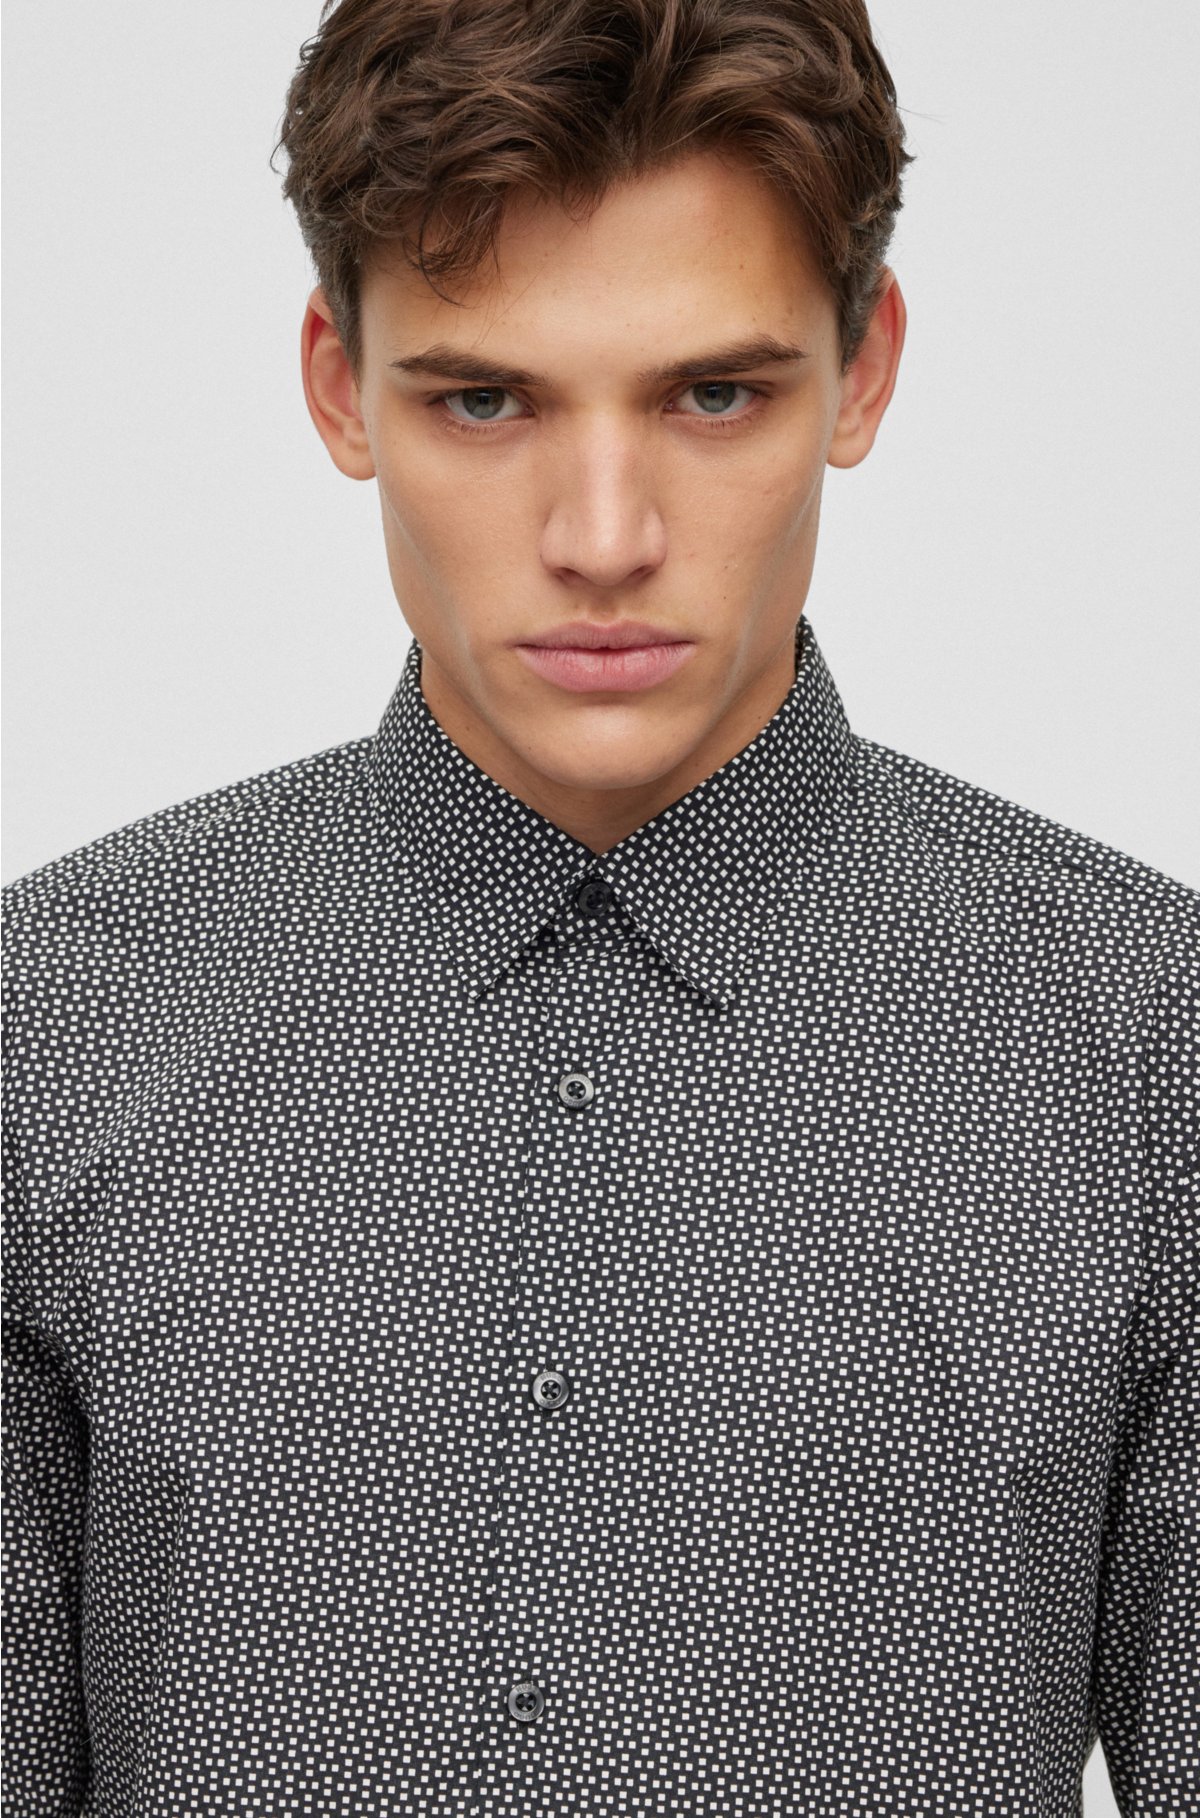 HUGO - Slim-fit shirt in printed stretch-cotton canvas